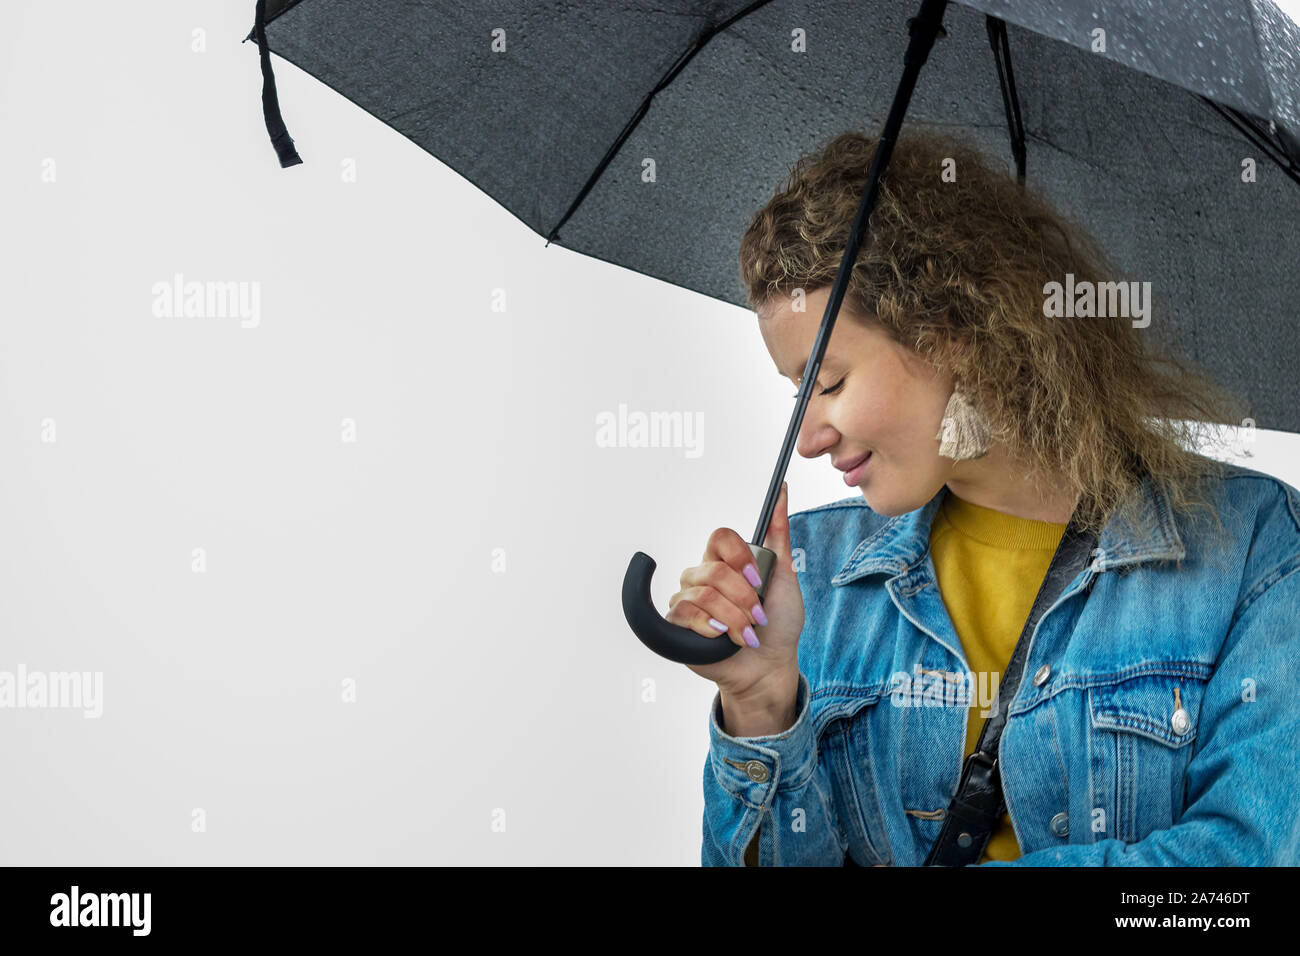 Portrait of a young woman with curly hair holding an umbrella. Stock Photo